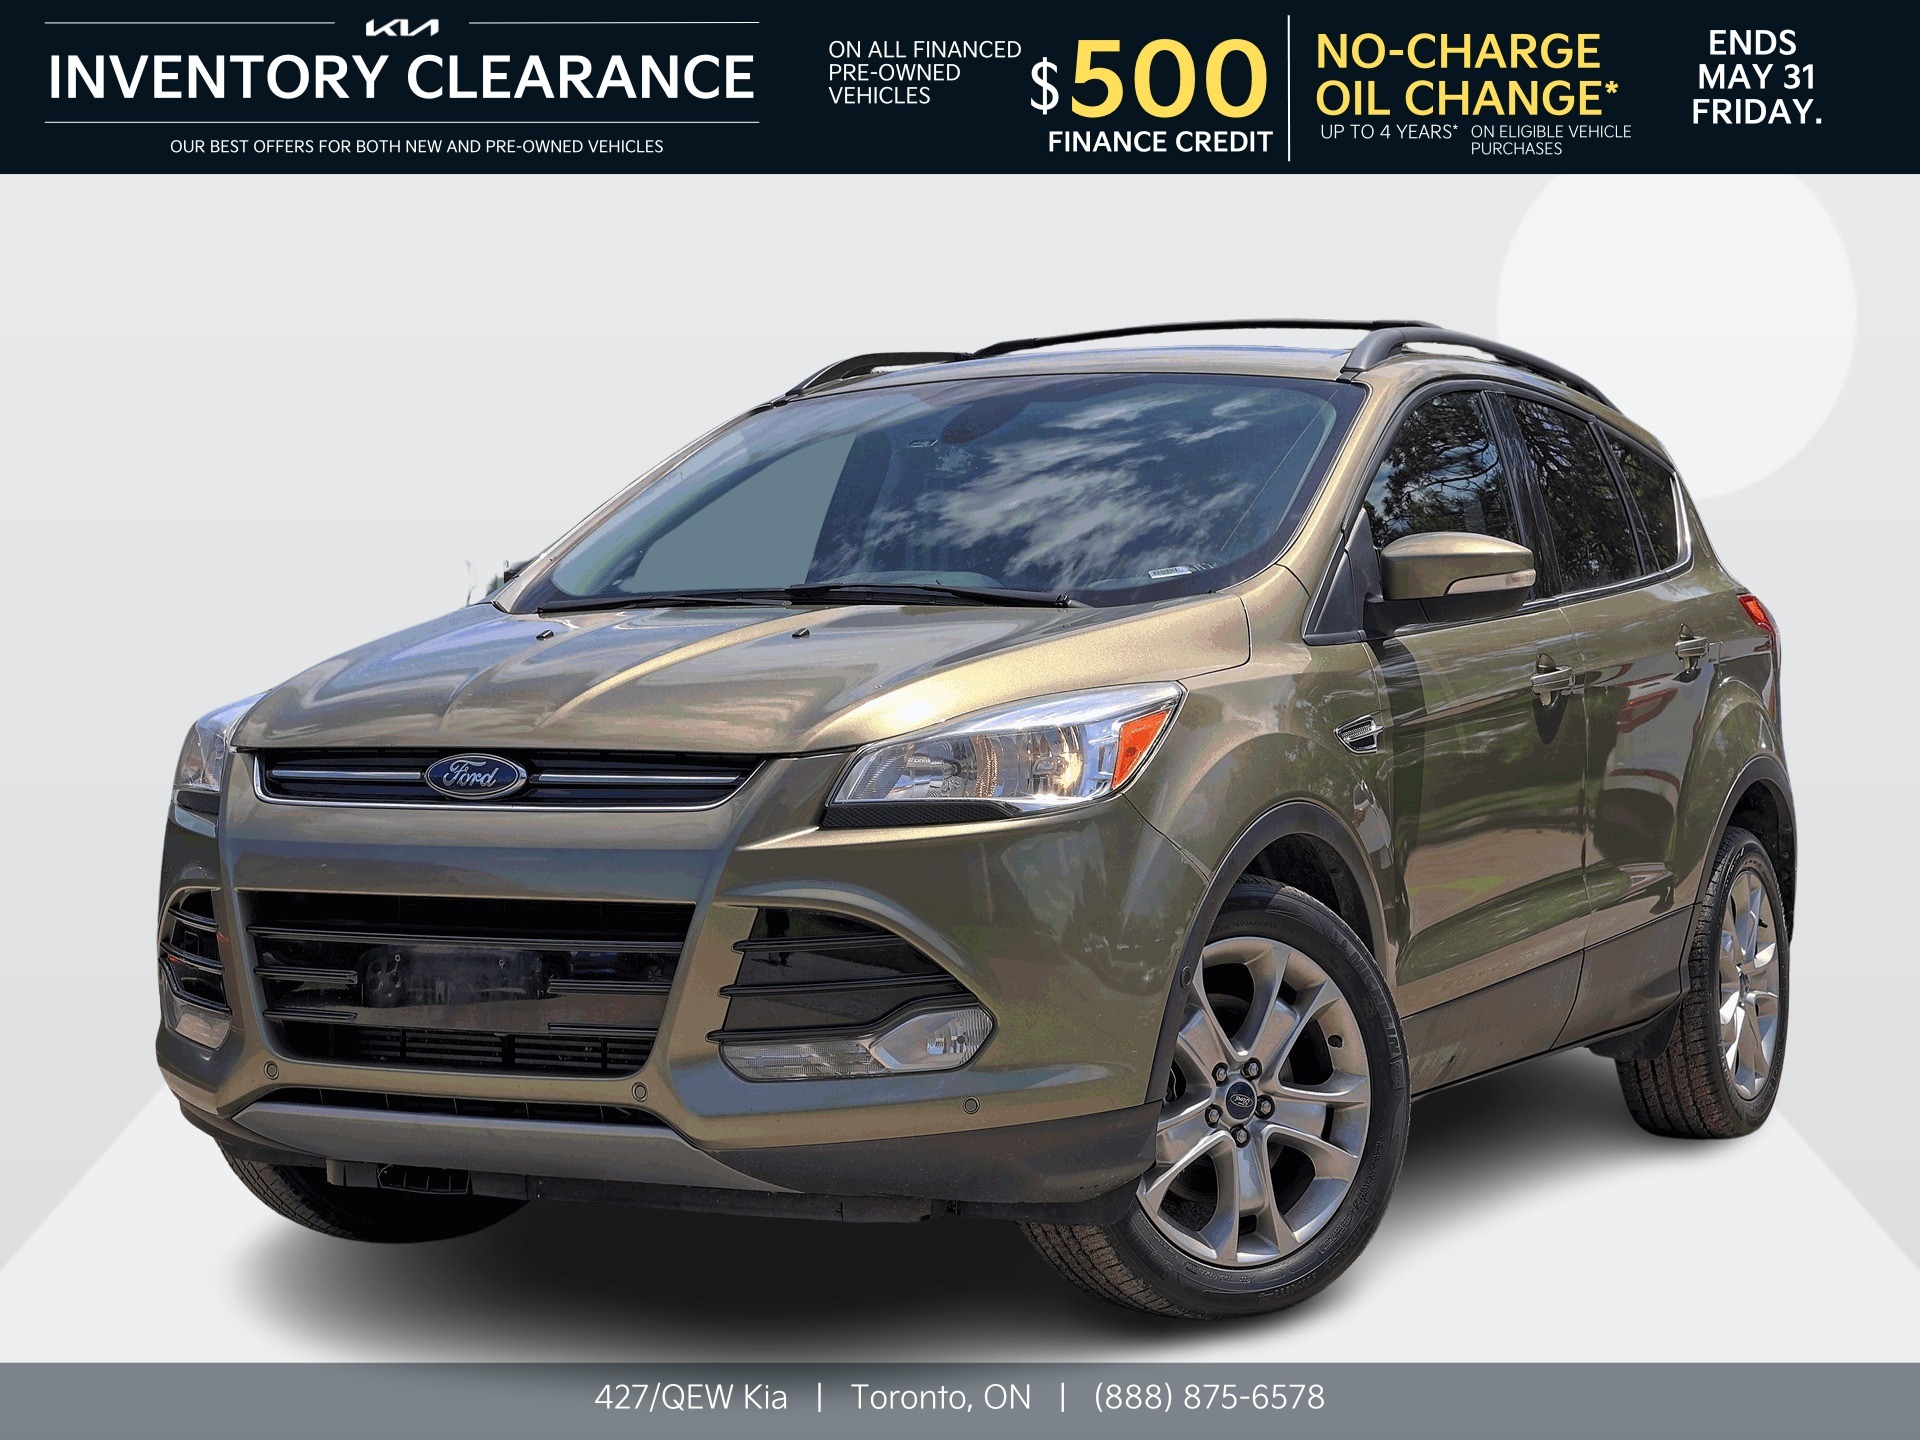 2013 Ford Escape SEL AWD | Power Liftgate | Heated Seat | Cruise